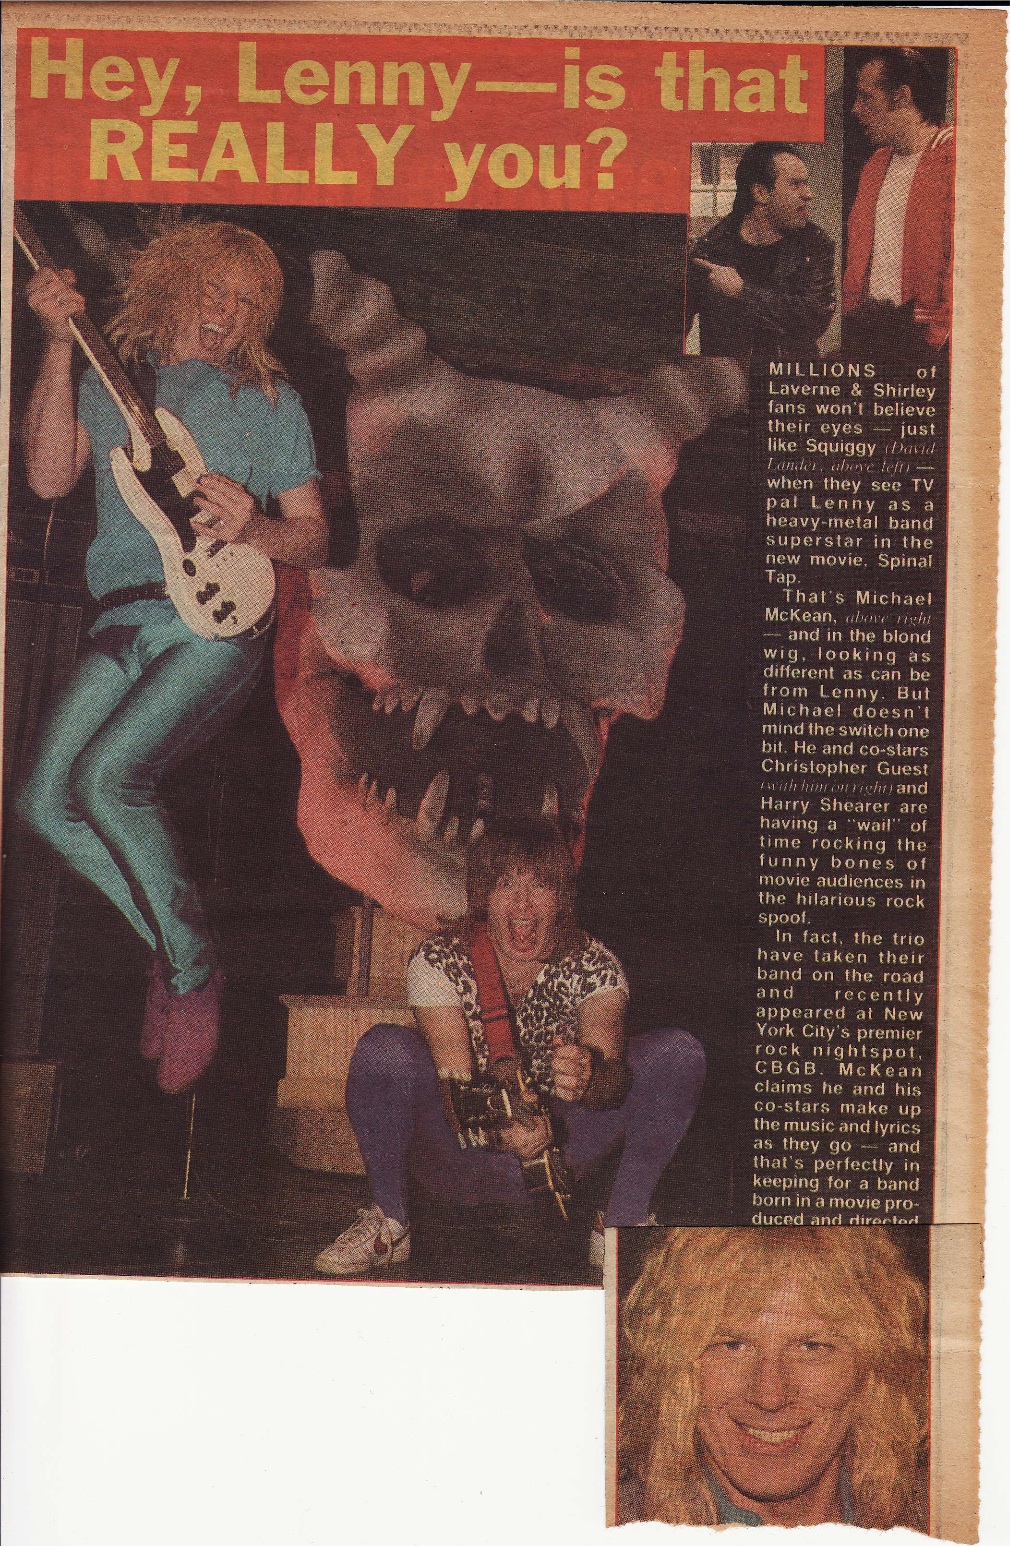 That's the skull I built for Spinal Tap!